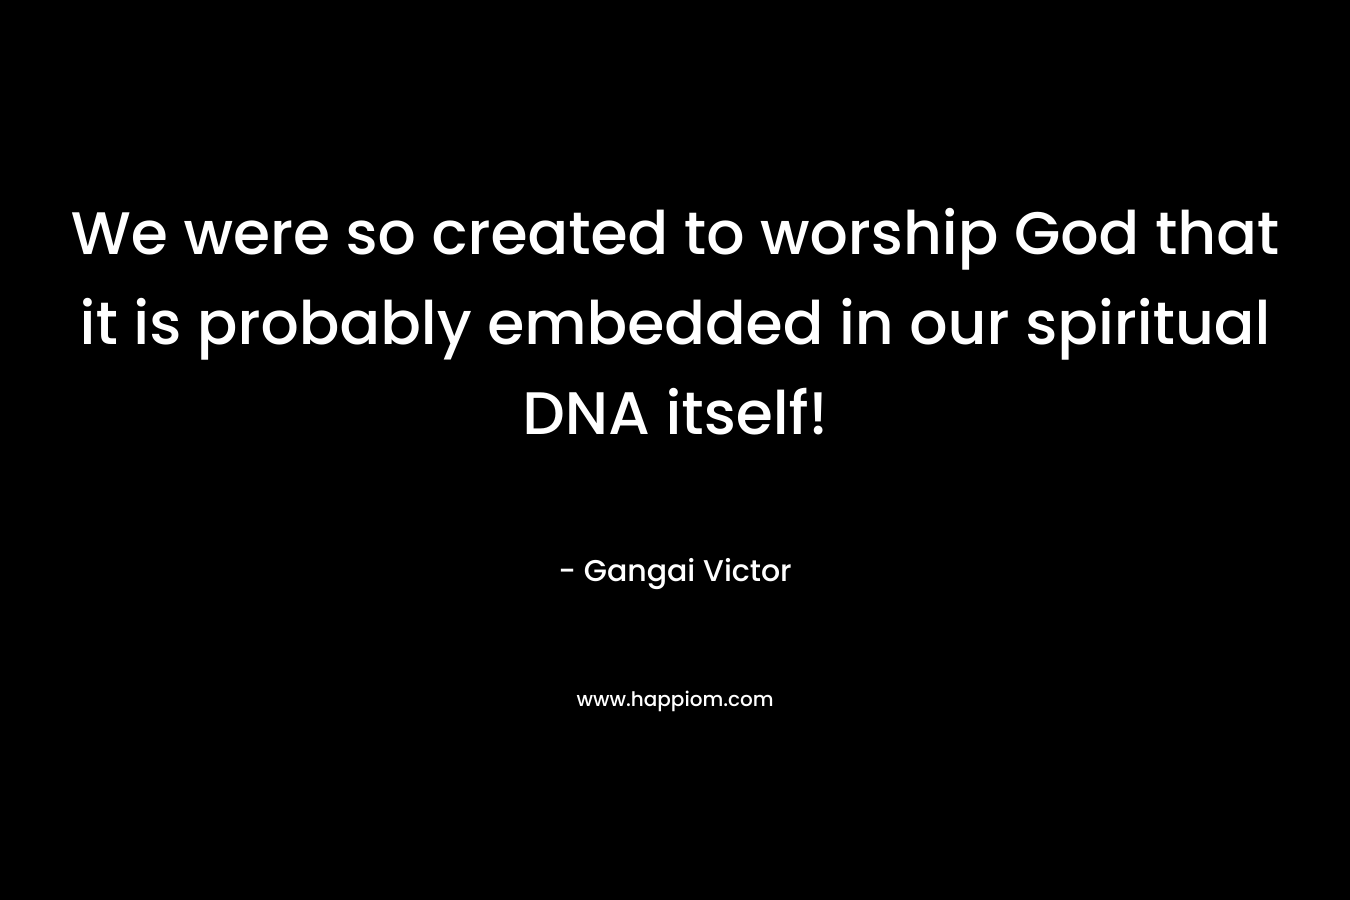 We were so created to worship God that it is probably embedded in our spiritual DNA itself! – Gangai Victor